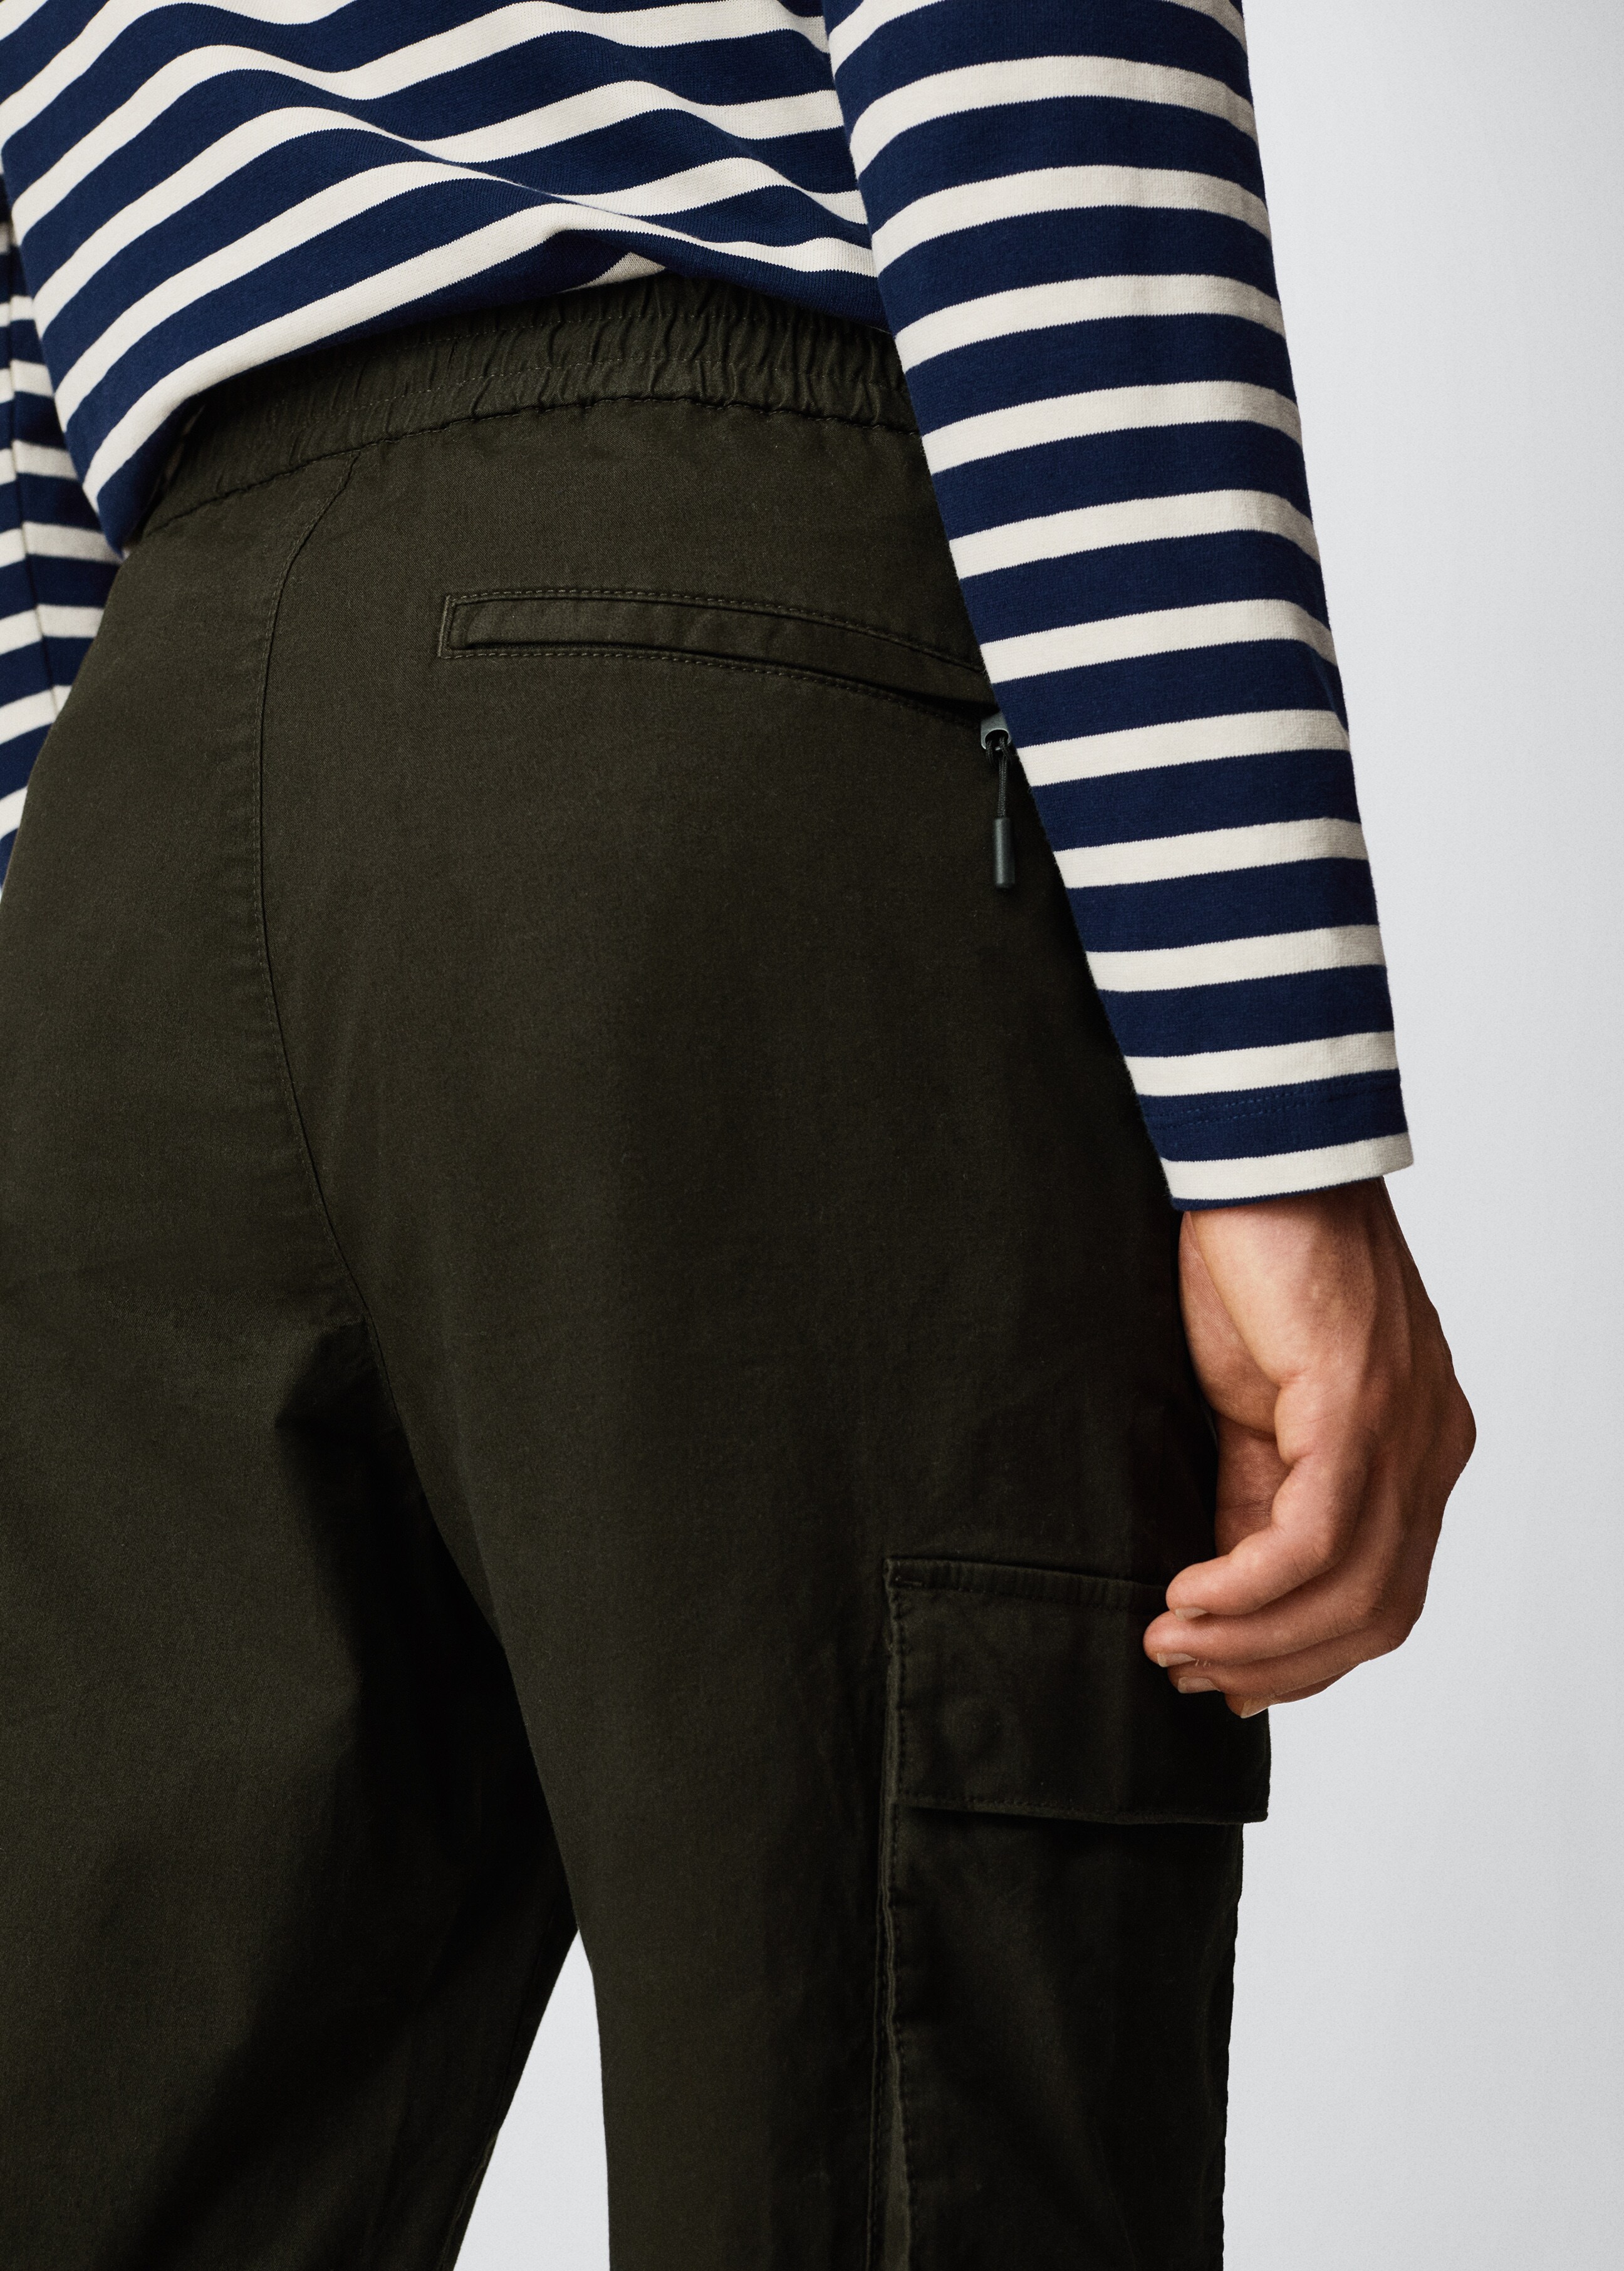 Cotton cargo pants - Details of the article 3